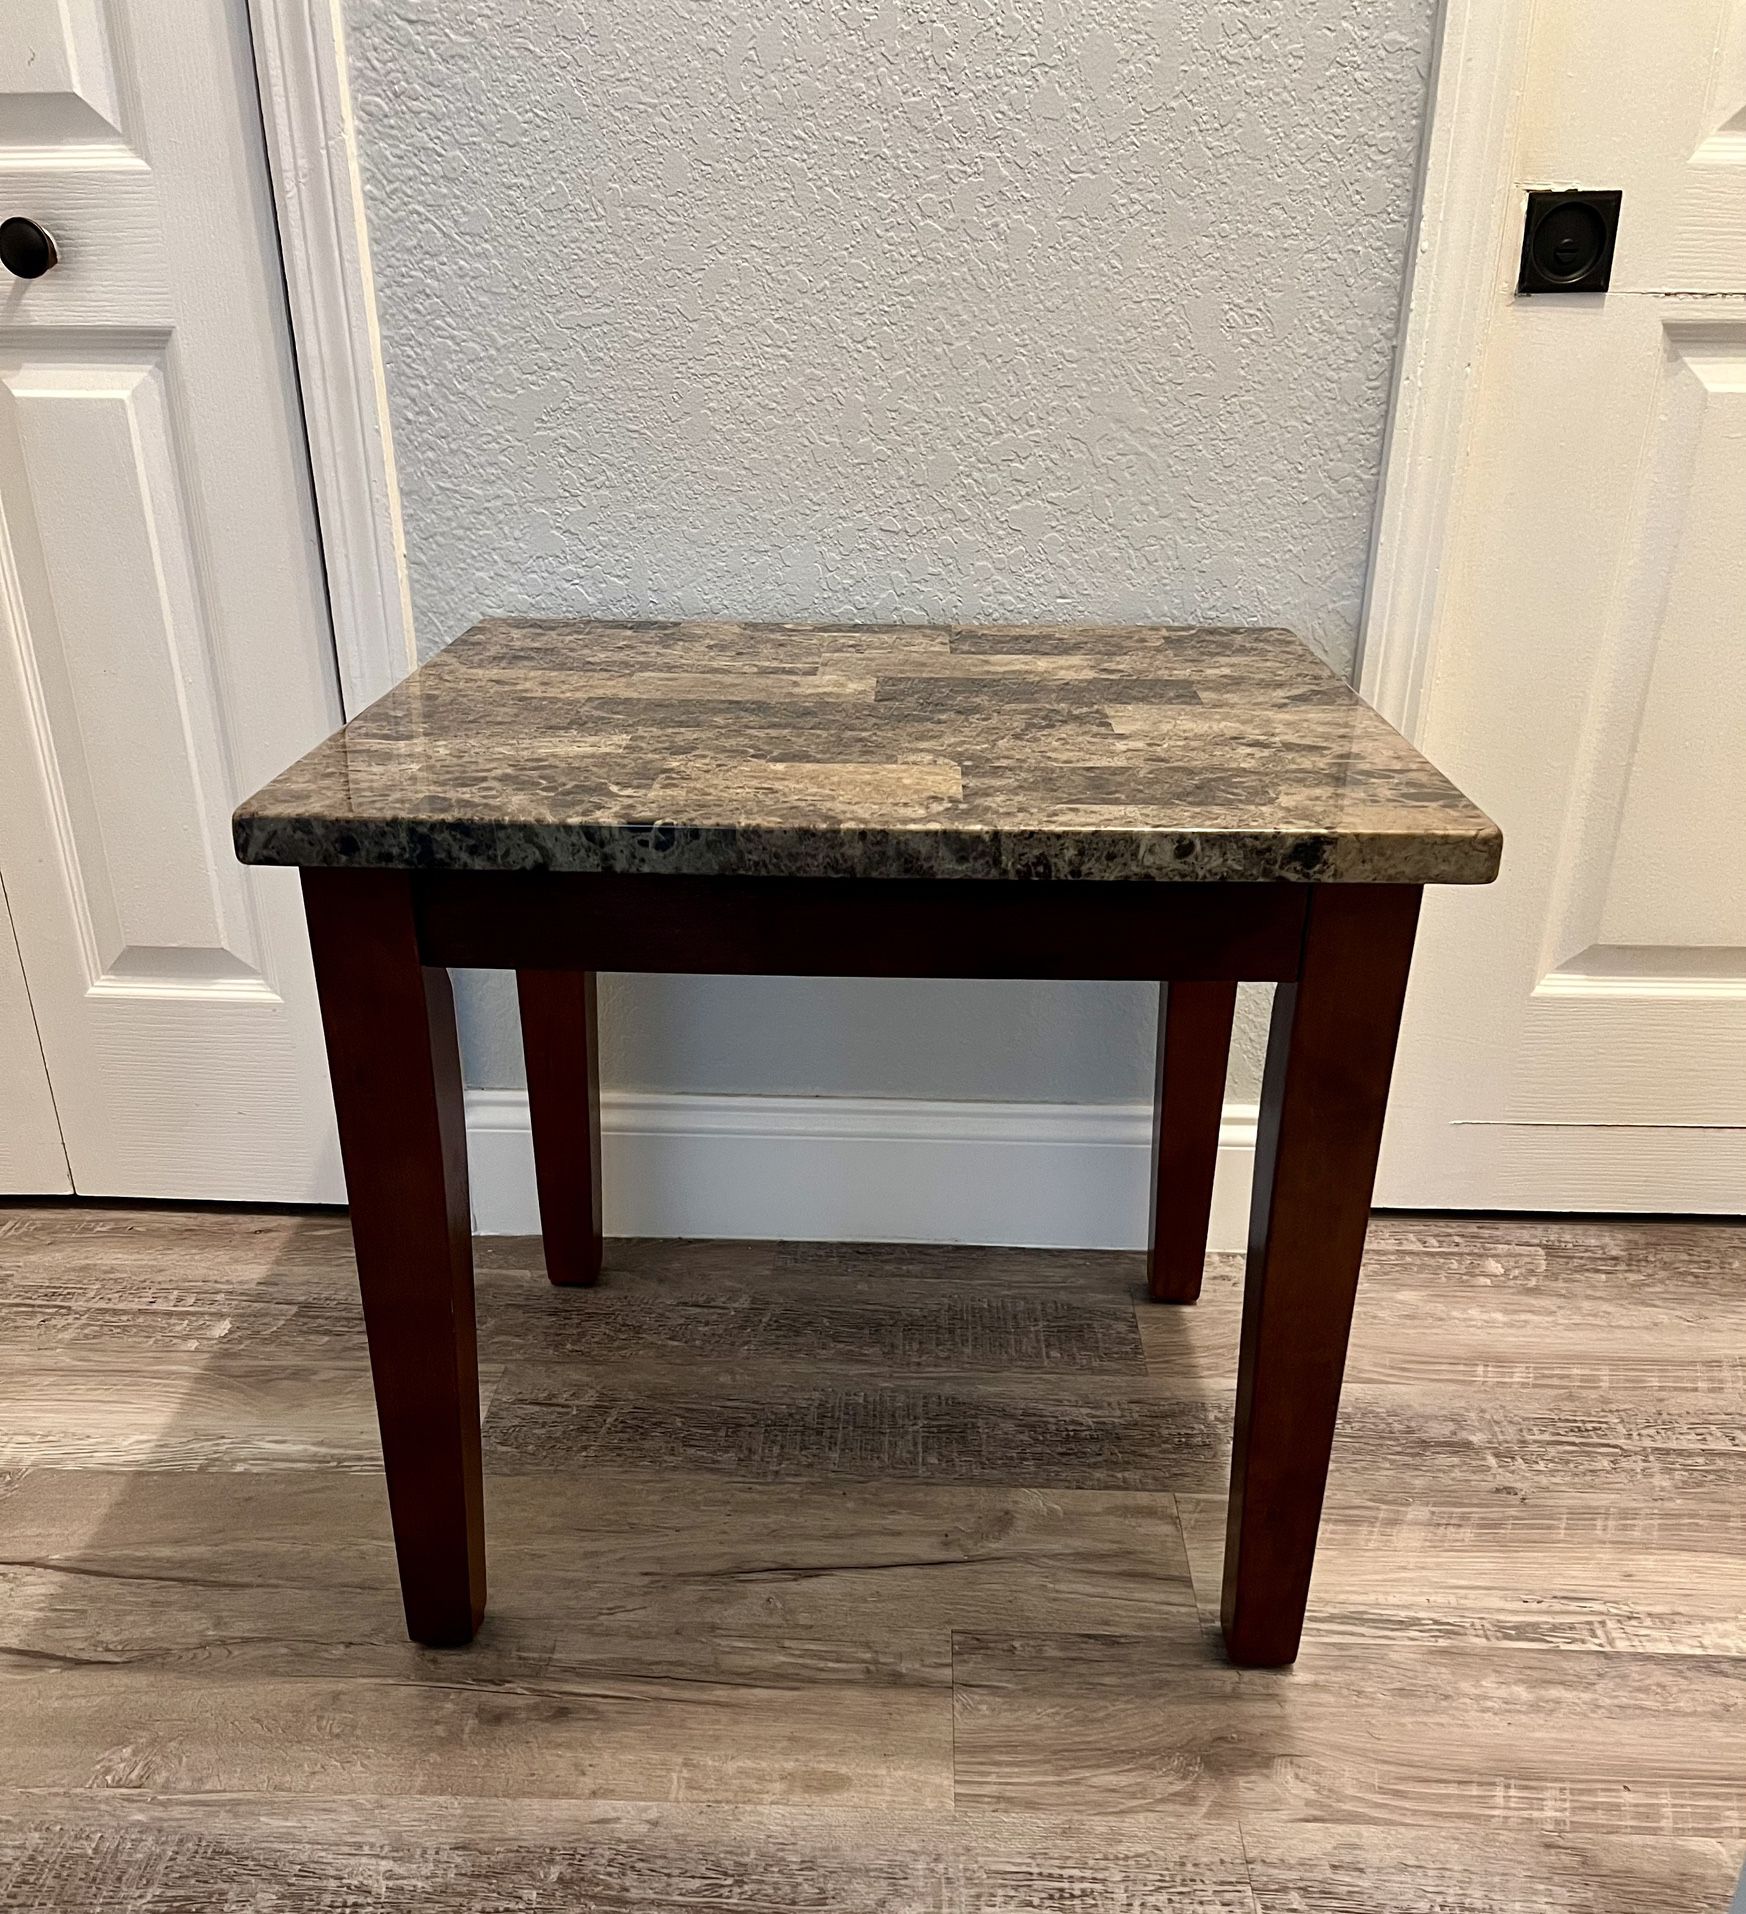 SIDE TABLE / SOFA TABLE / END TABLE $20